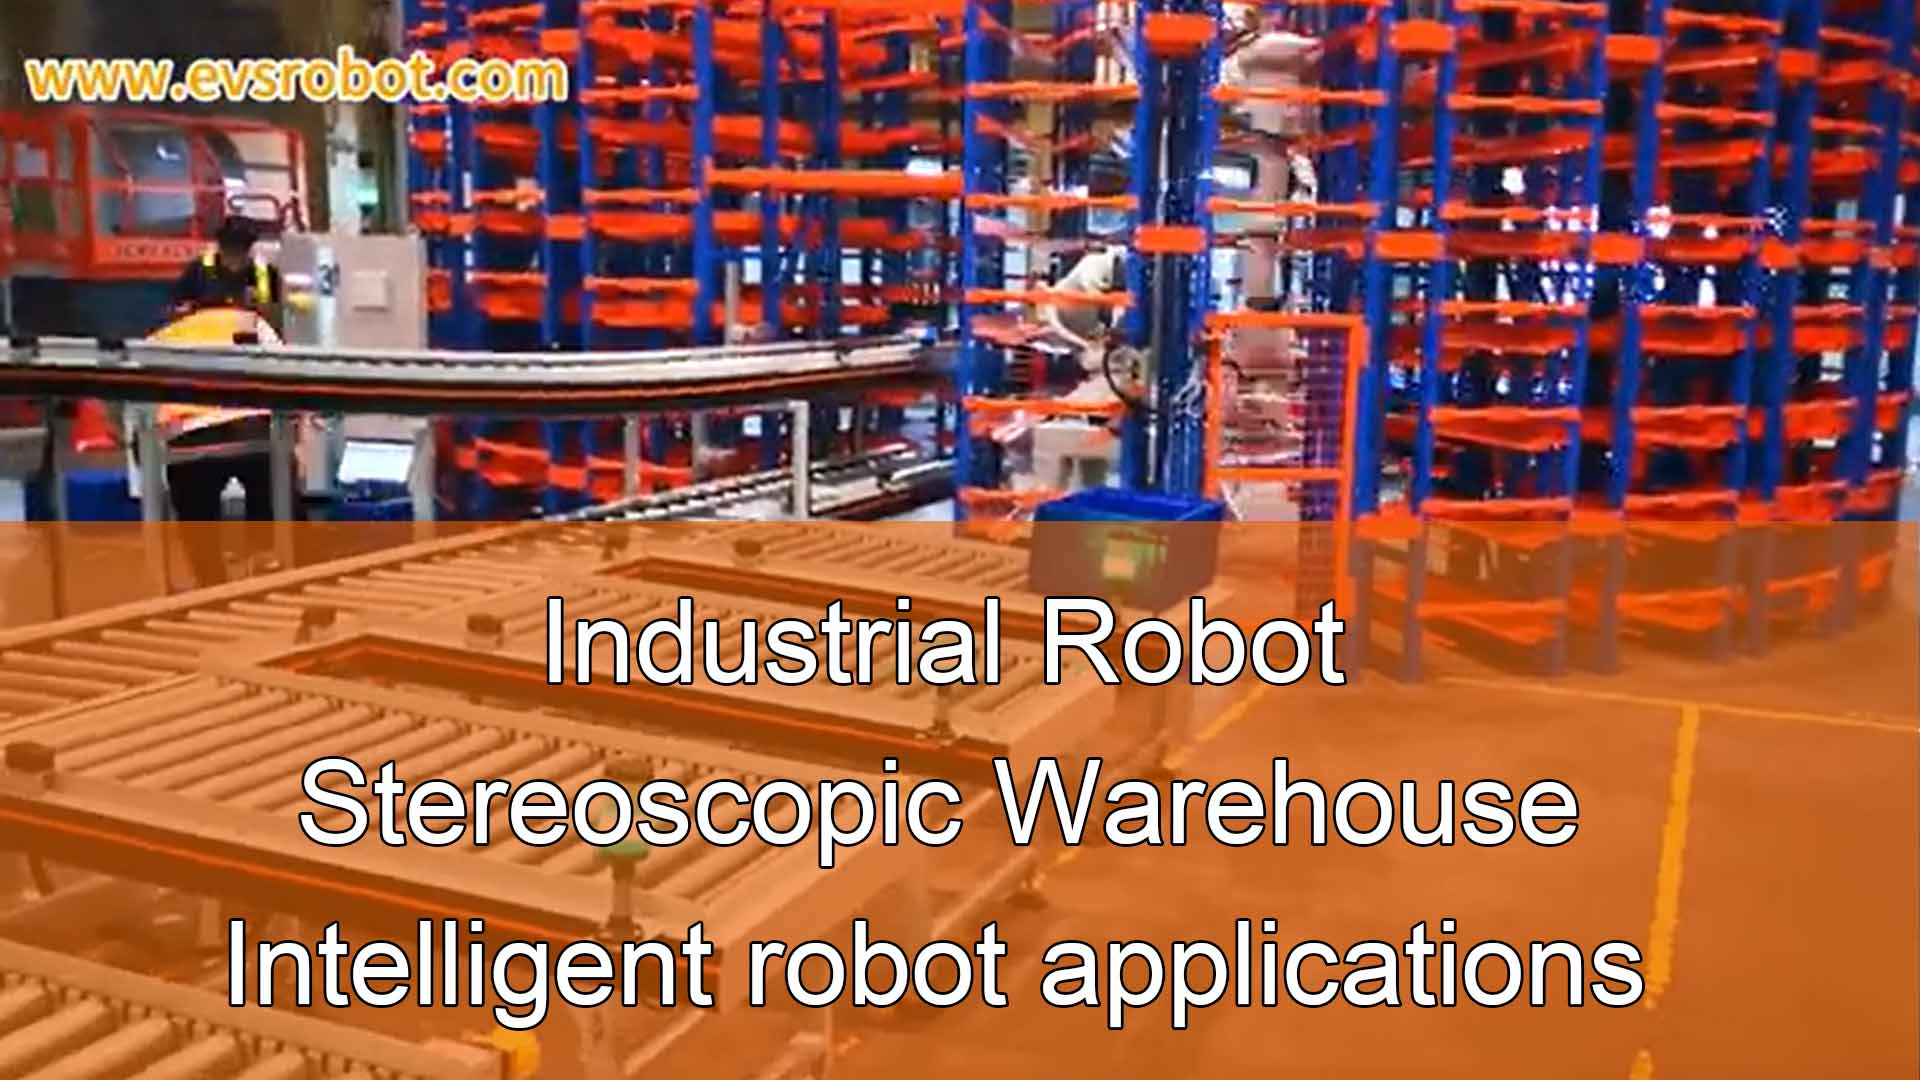 Industrial Robot /Stereoscopic Warehouse /Intelligent robot applications